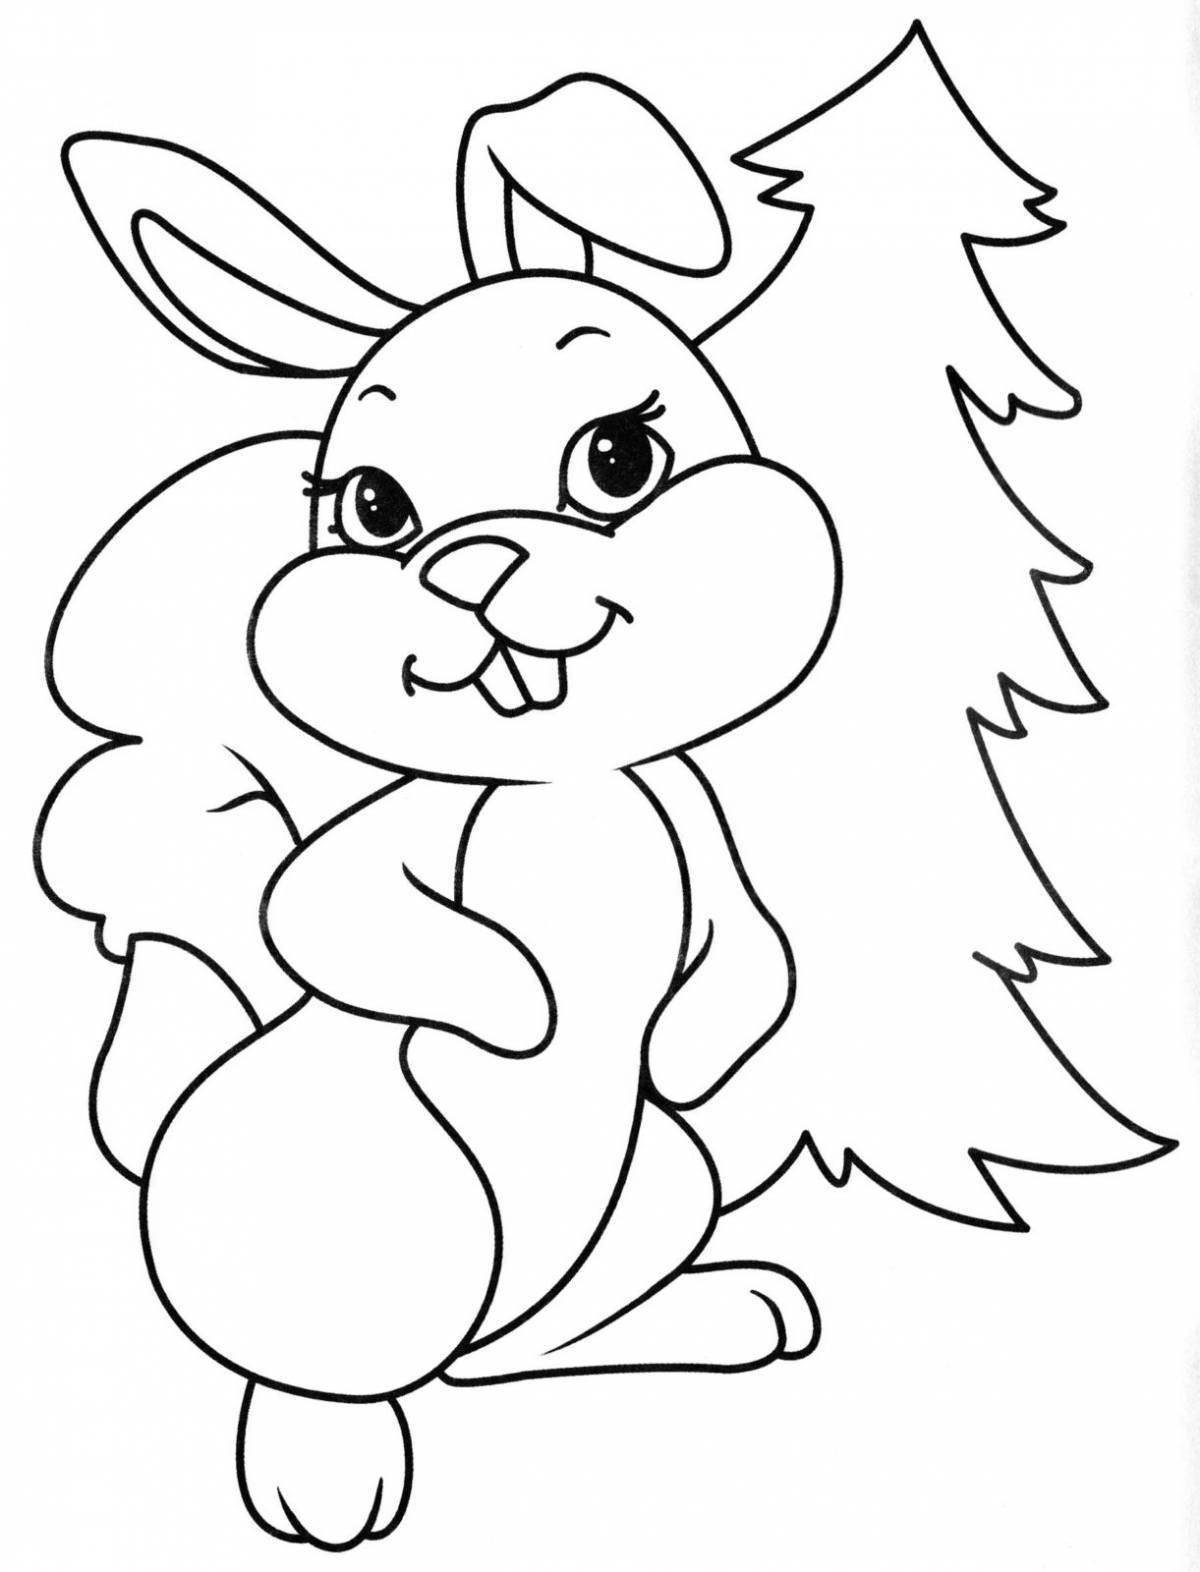 Coloring book cheerful hare for children 2-3 years old